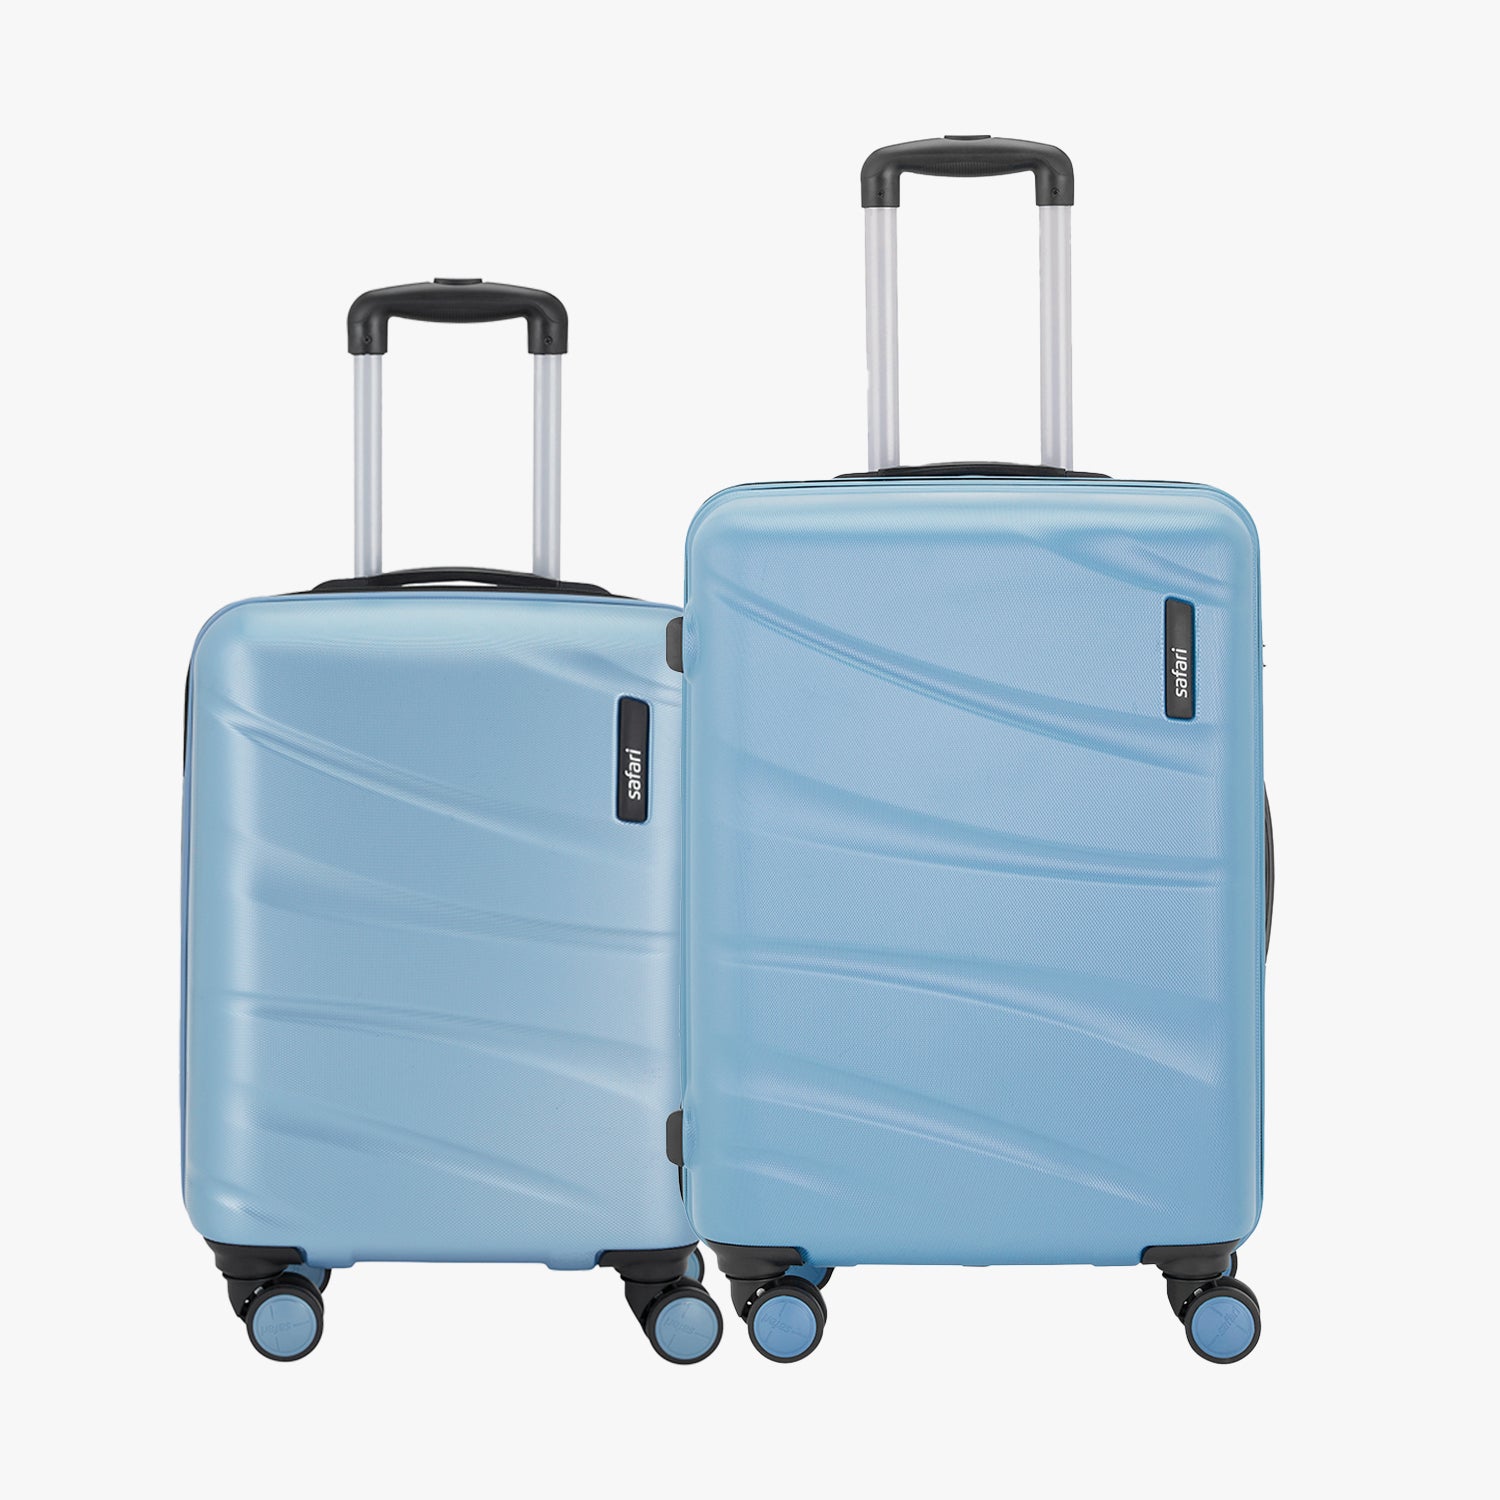 Persia Hard Luggage with Dual Wheels Combo (Small and Medium)- Pearl Blue